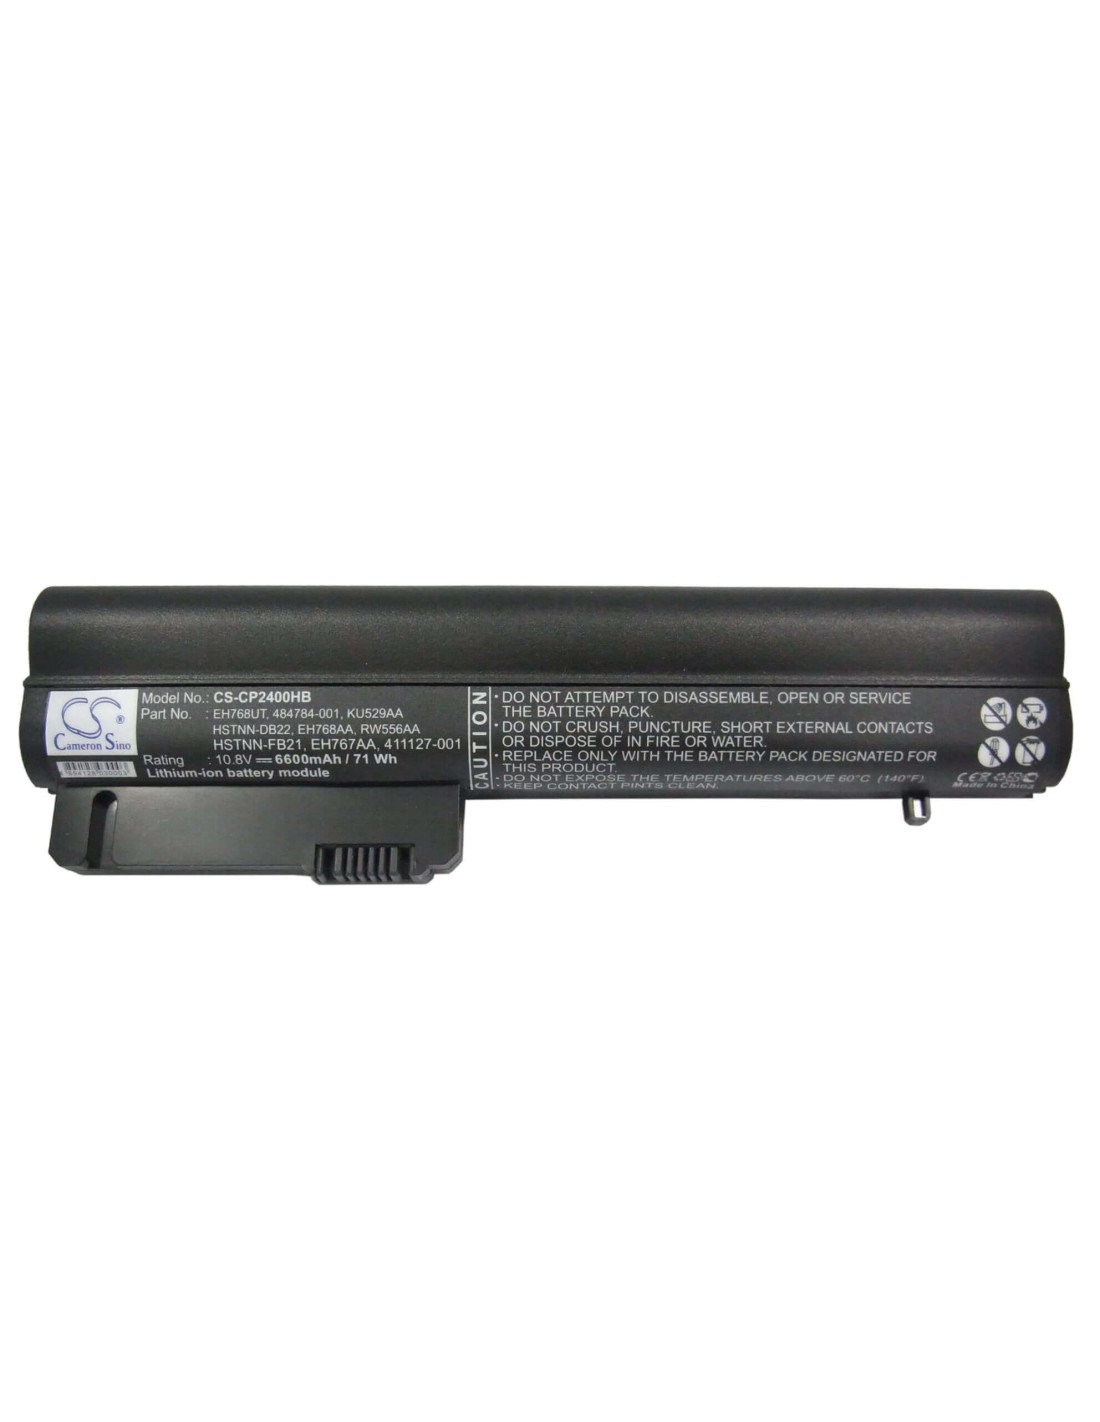 Black Battery for Compaq Business Notebook Nc2400, Business Notebook 2400, Business Notebook 2510p 10.8V, 6600mAh - 71.28Wh